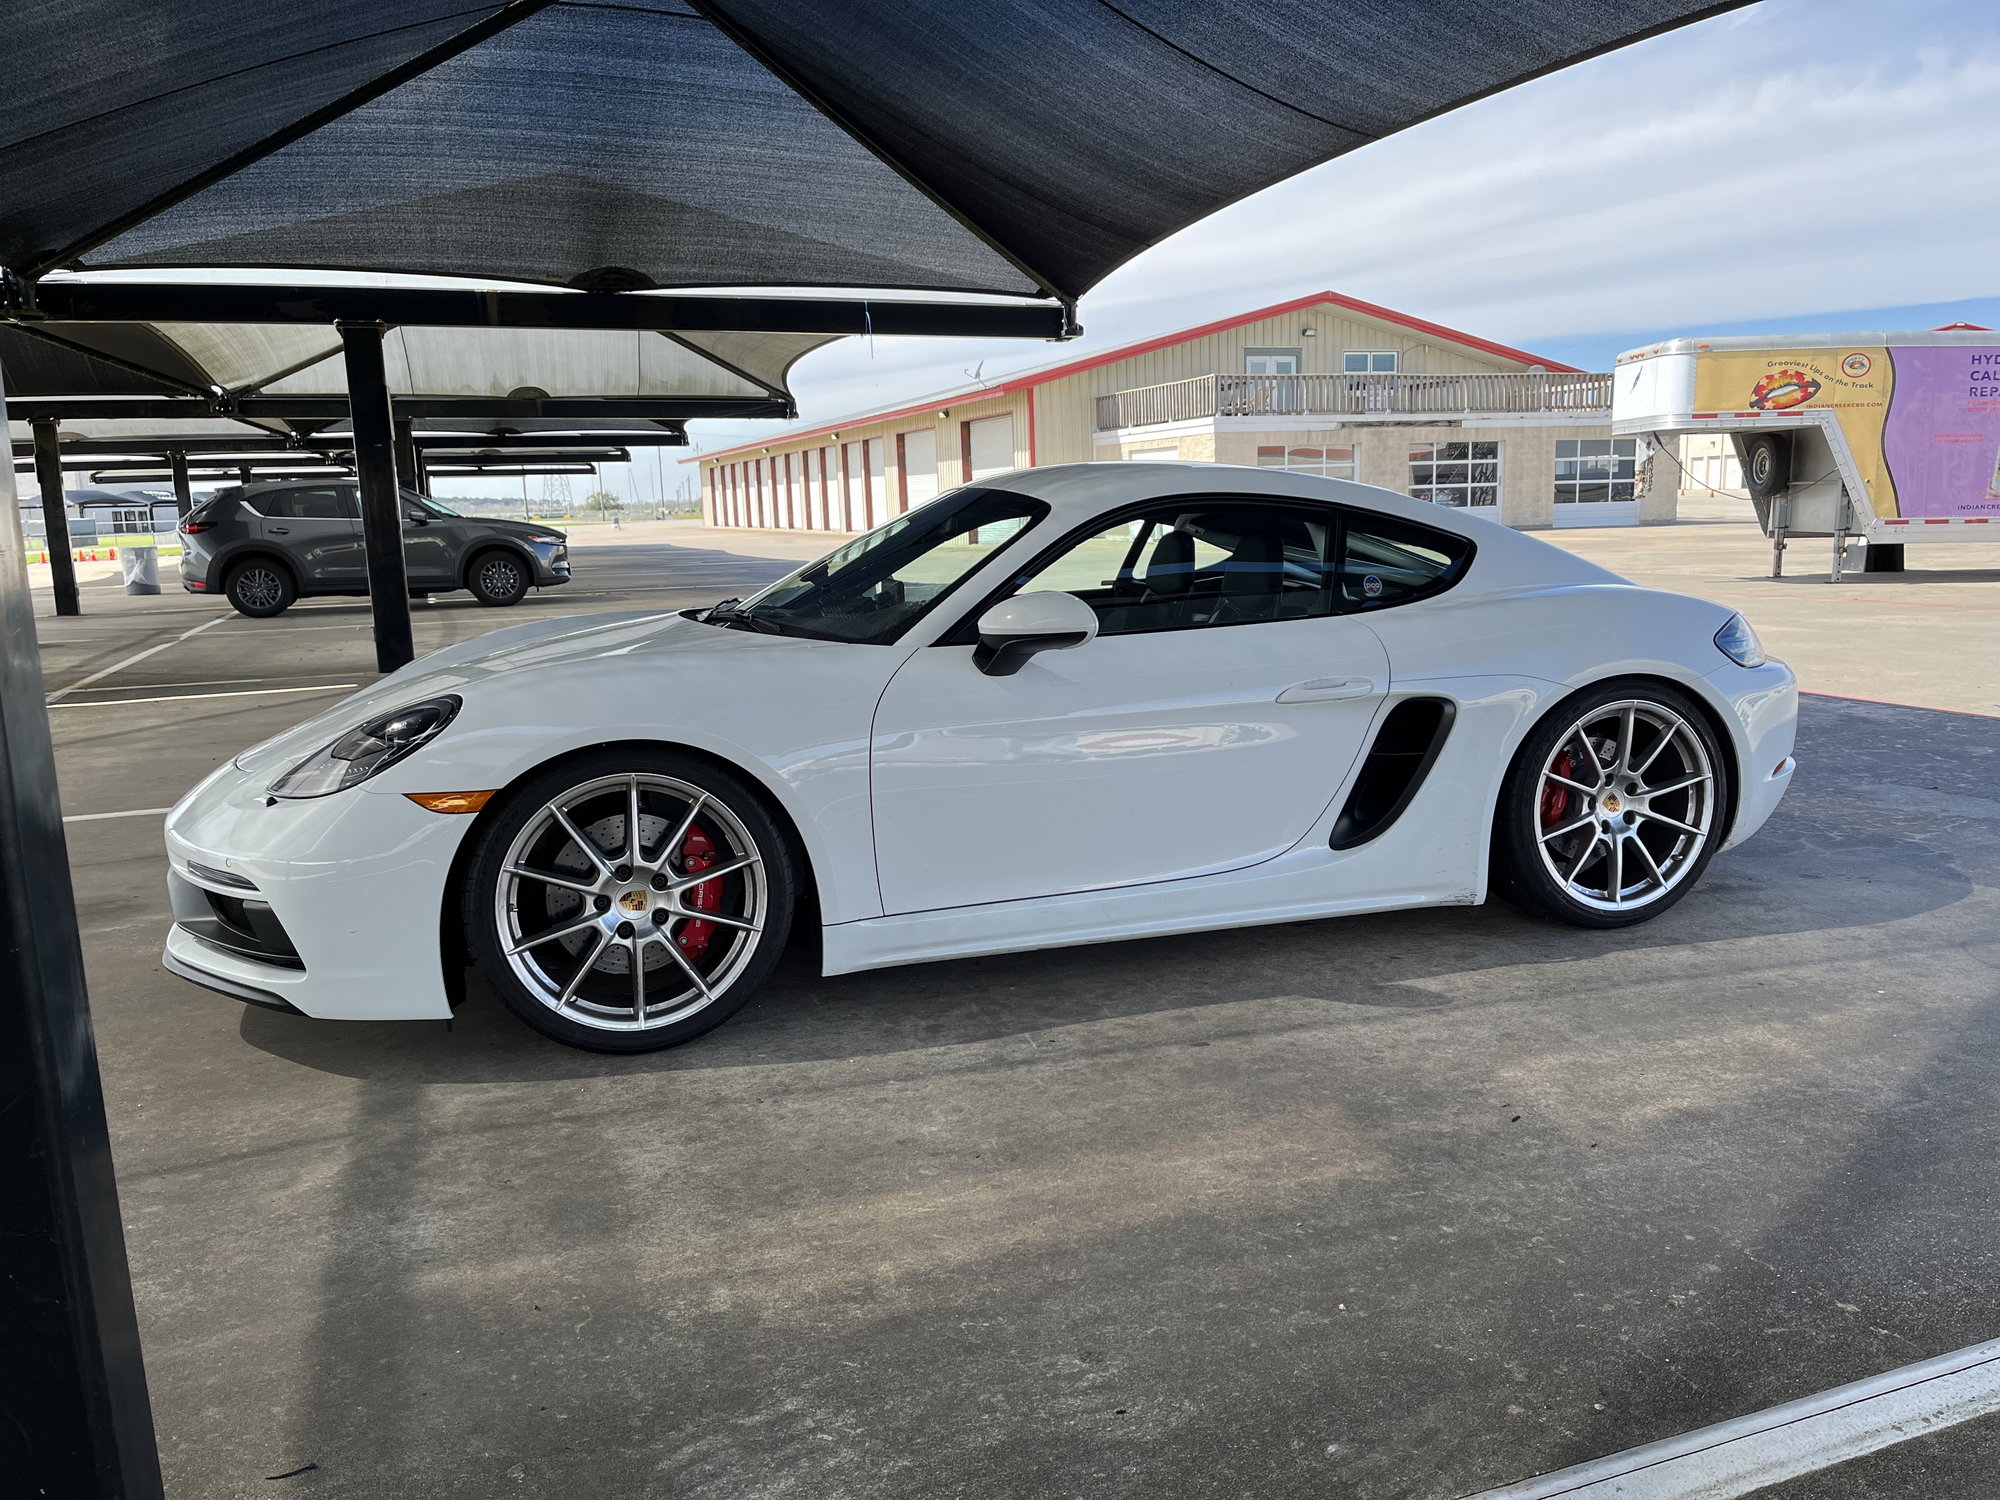 2023 Porsche 718 - 2023 Track prepped 718 Cayman GTS 4.0 For Sale - Used - VIN WP0AD2A89PS271002 - 1,400 Miles - 6 cyl - 2WD - Manual - Coupe - White - Houston, TX 77019, United States